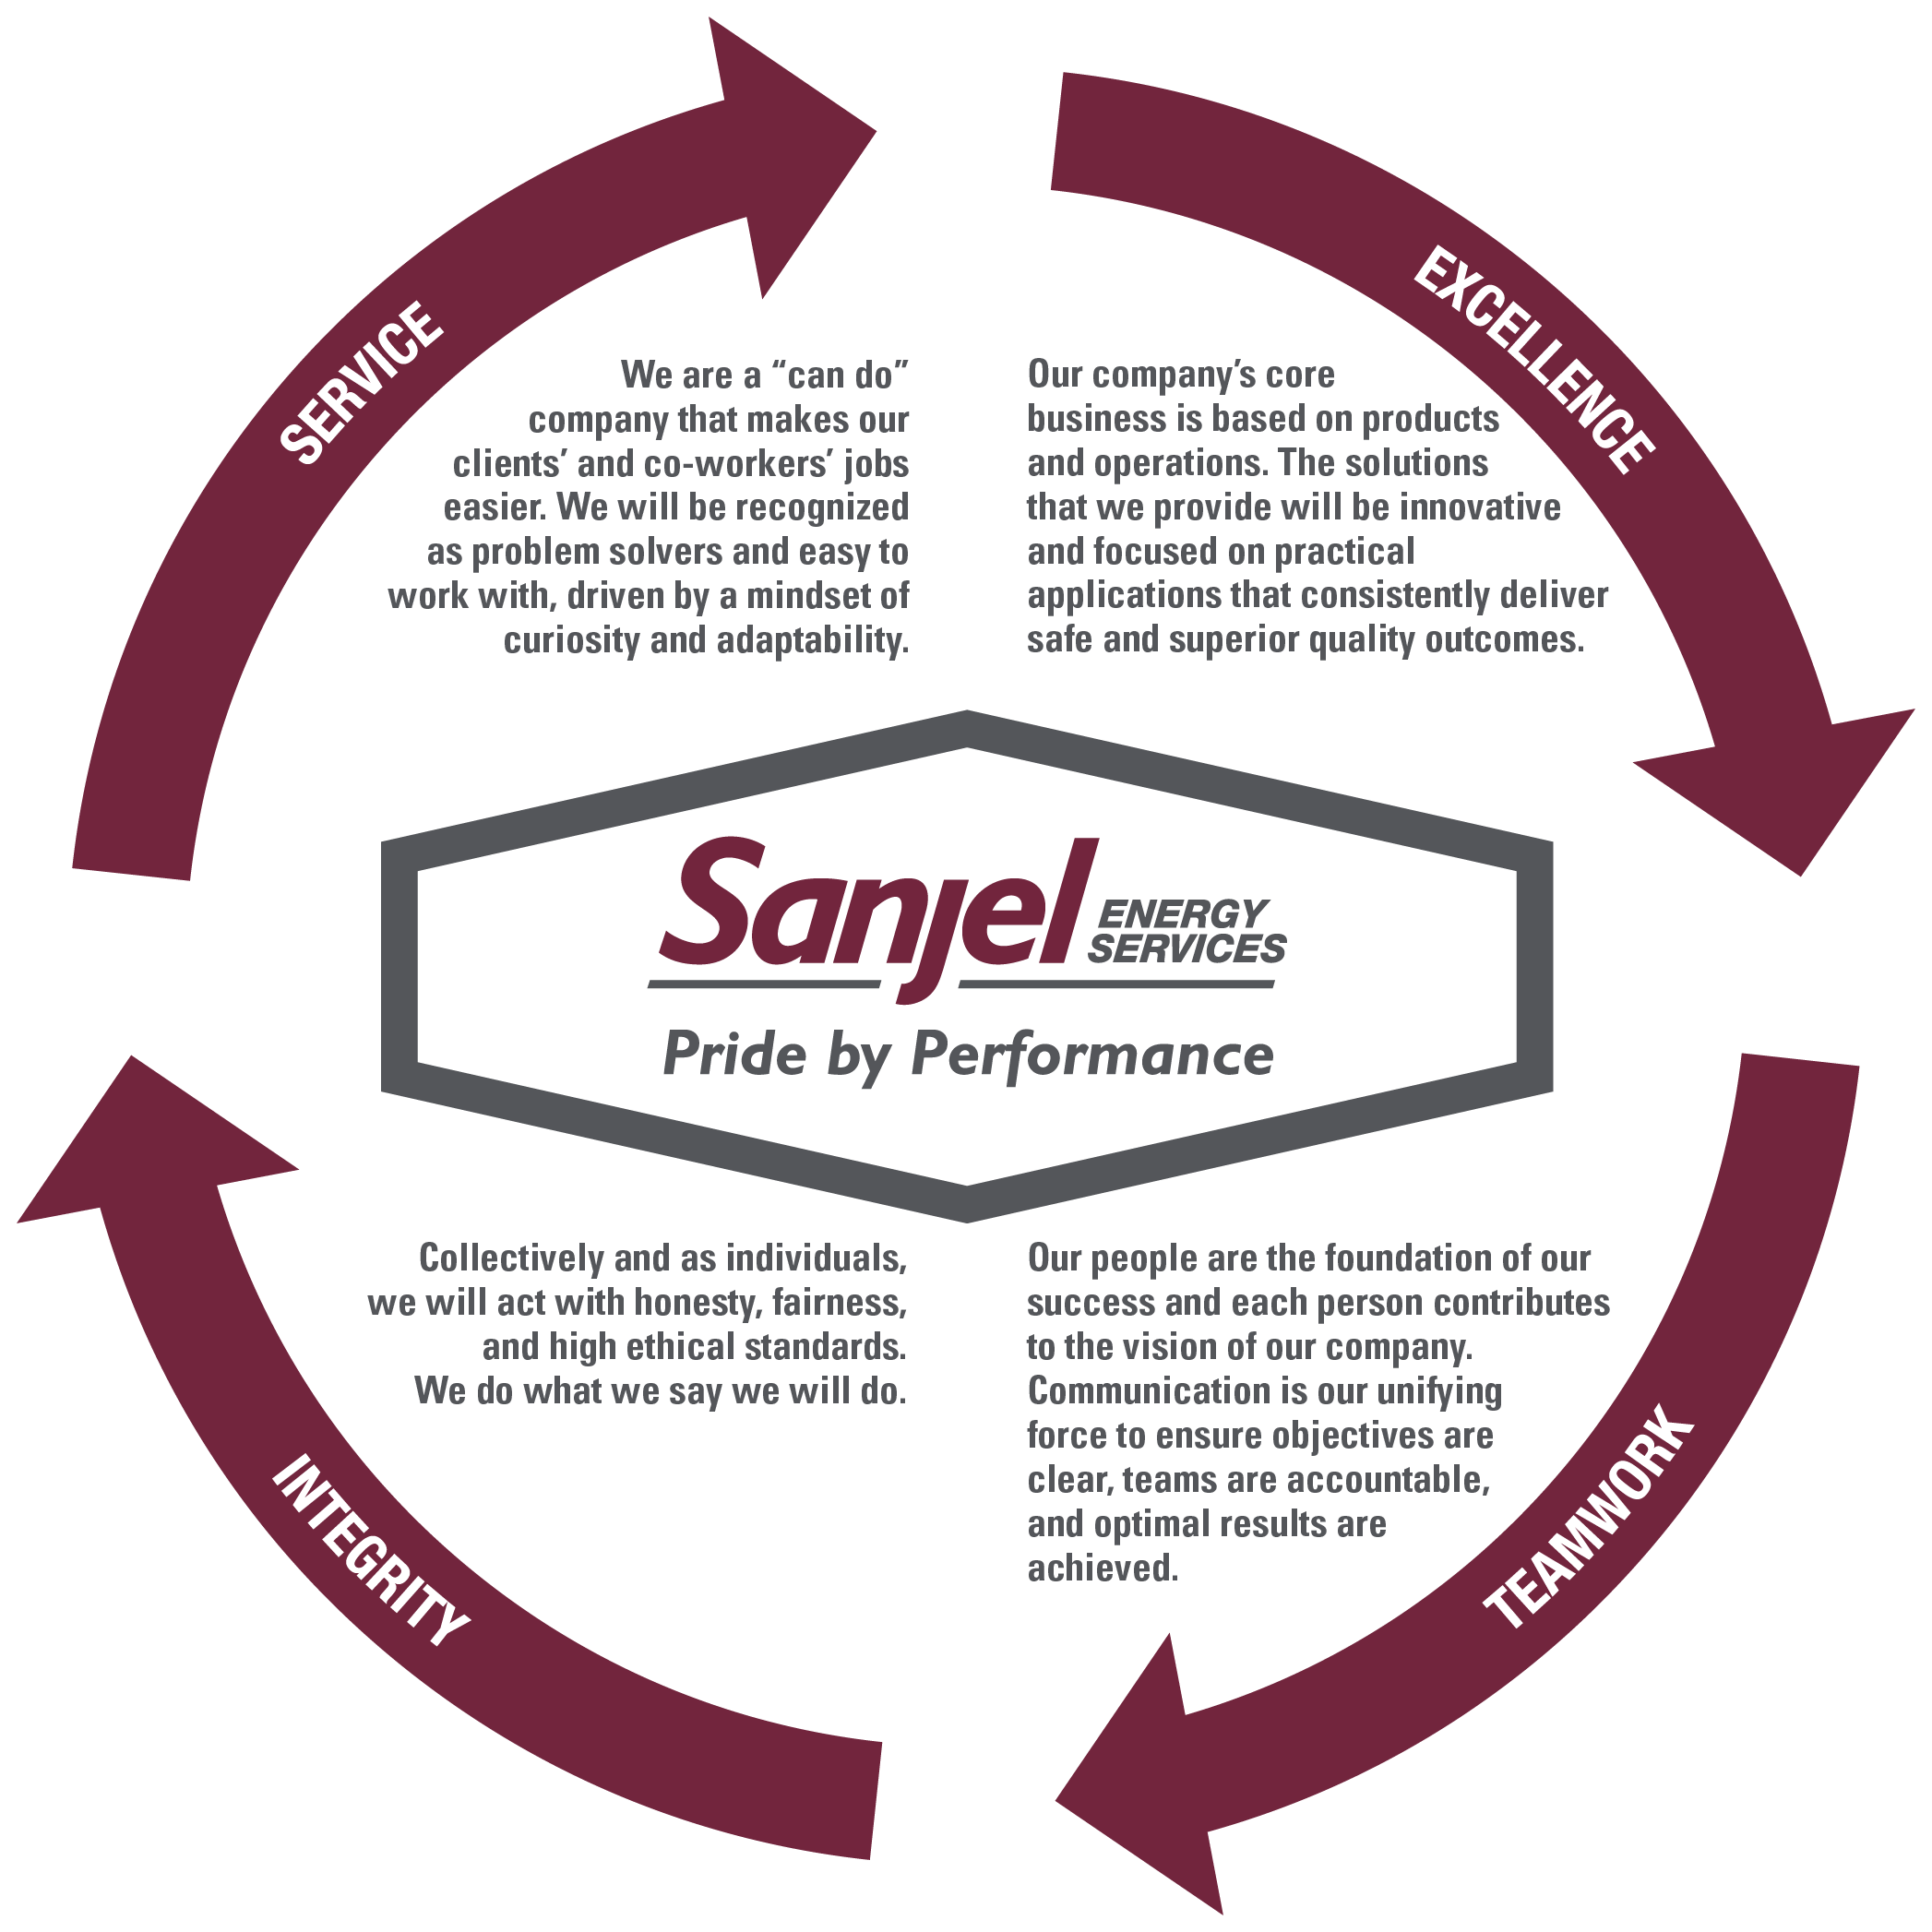 Sanjel Energy’s culture of Service, Excellence, Teamwork and Integrity drives our success.